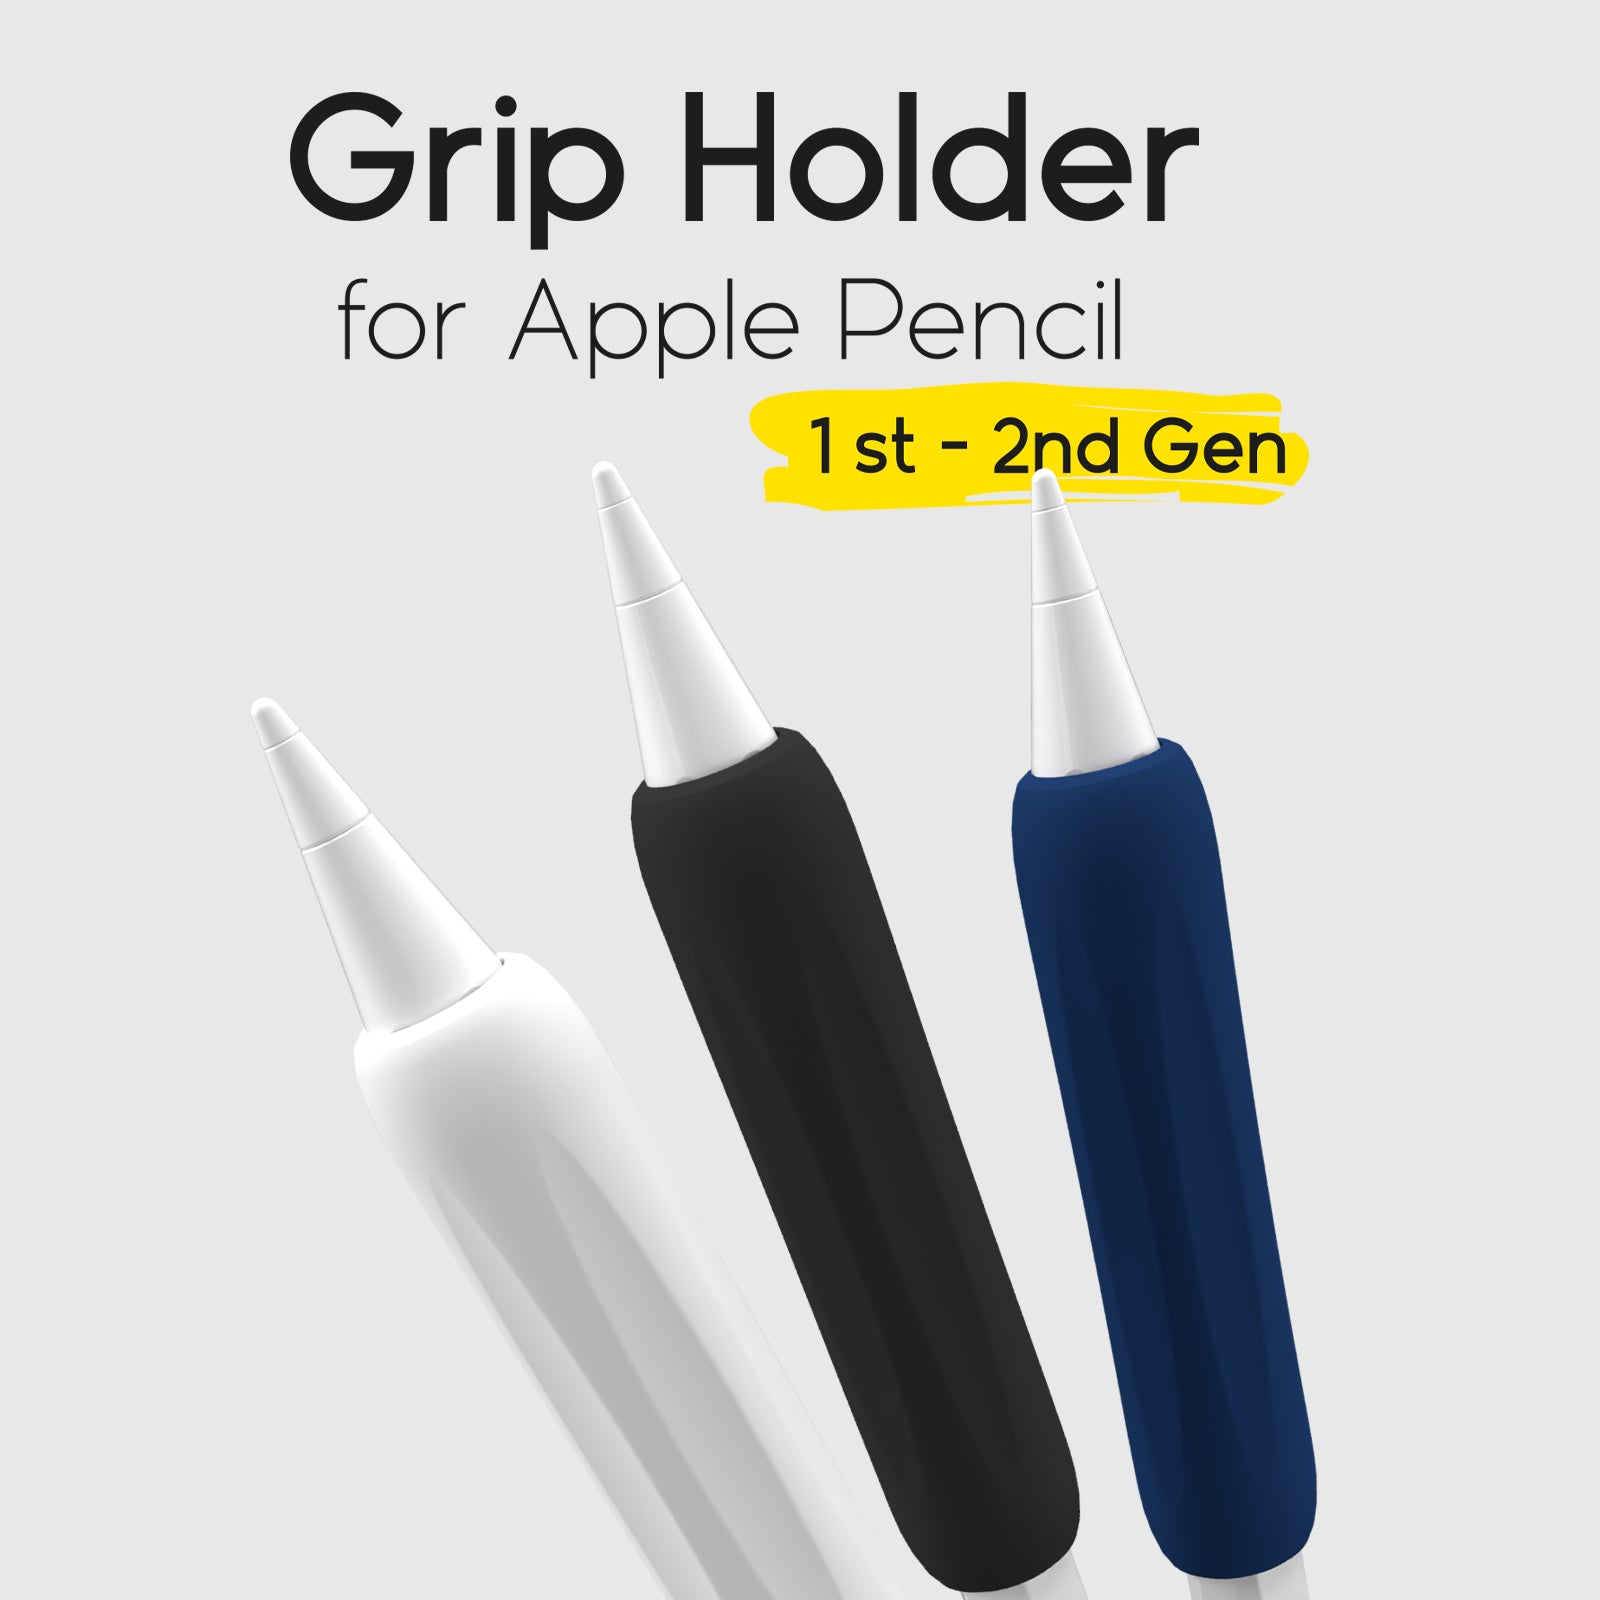 Grip holder for 1st and 2nd generation Apple Pencils